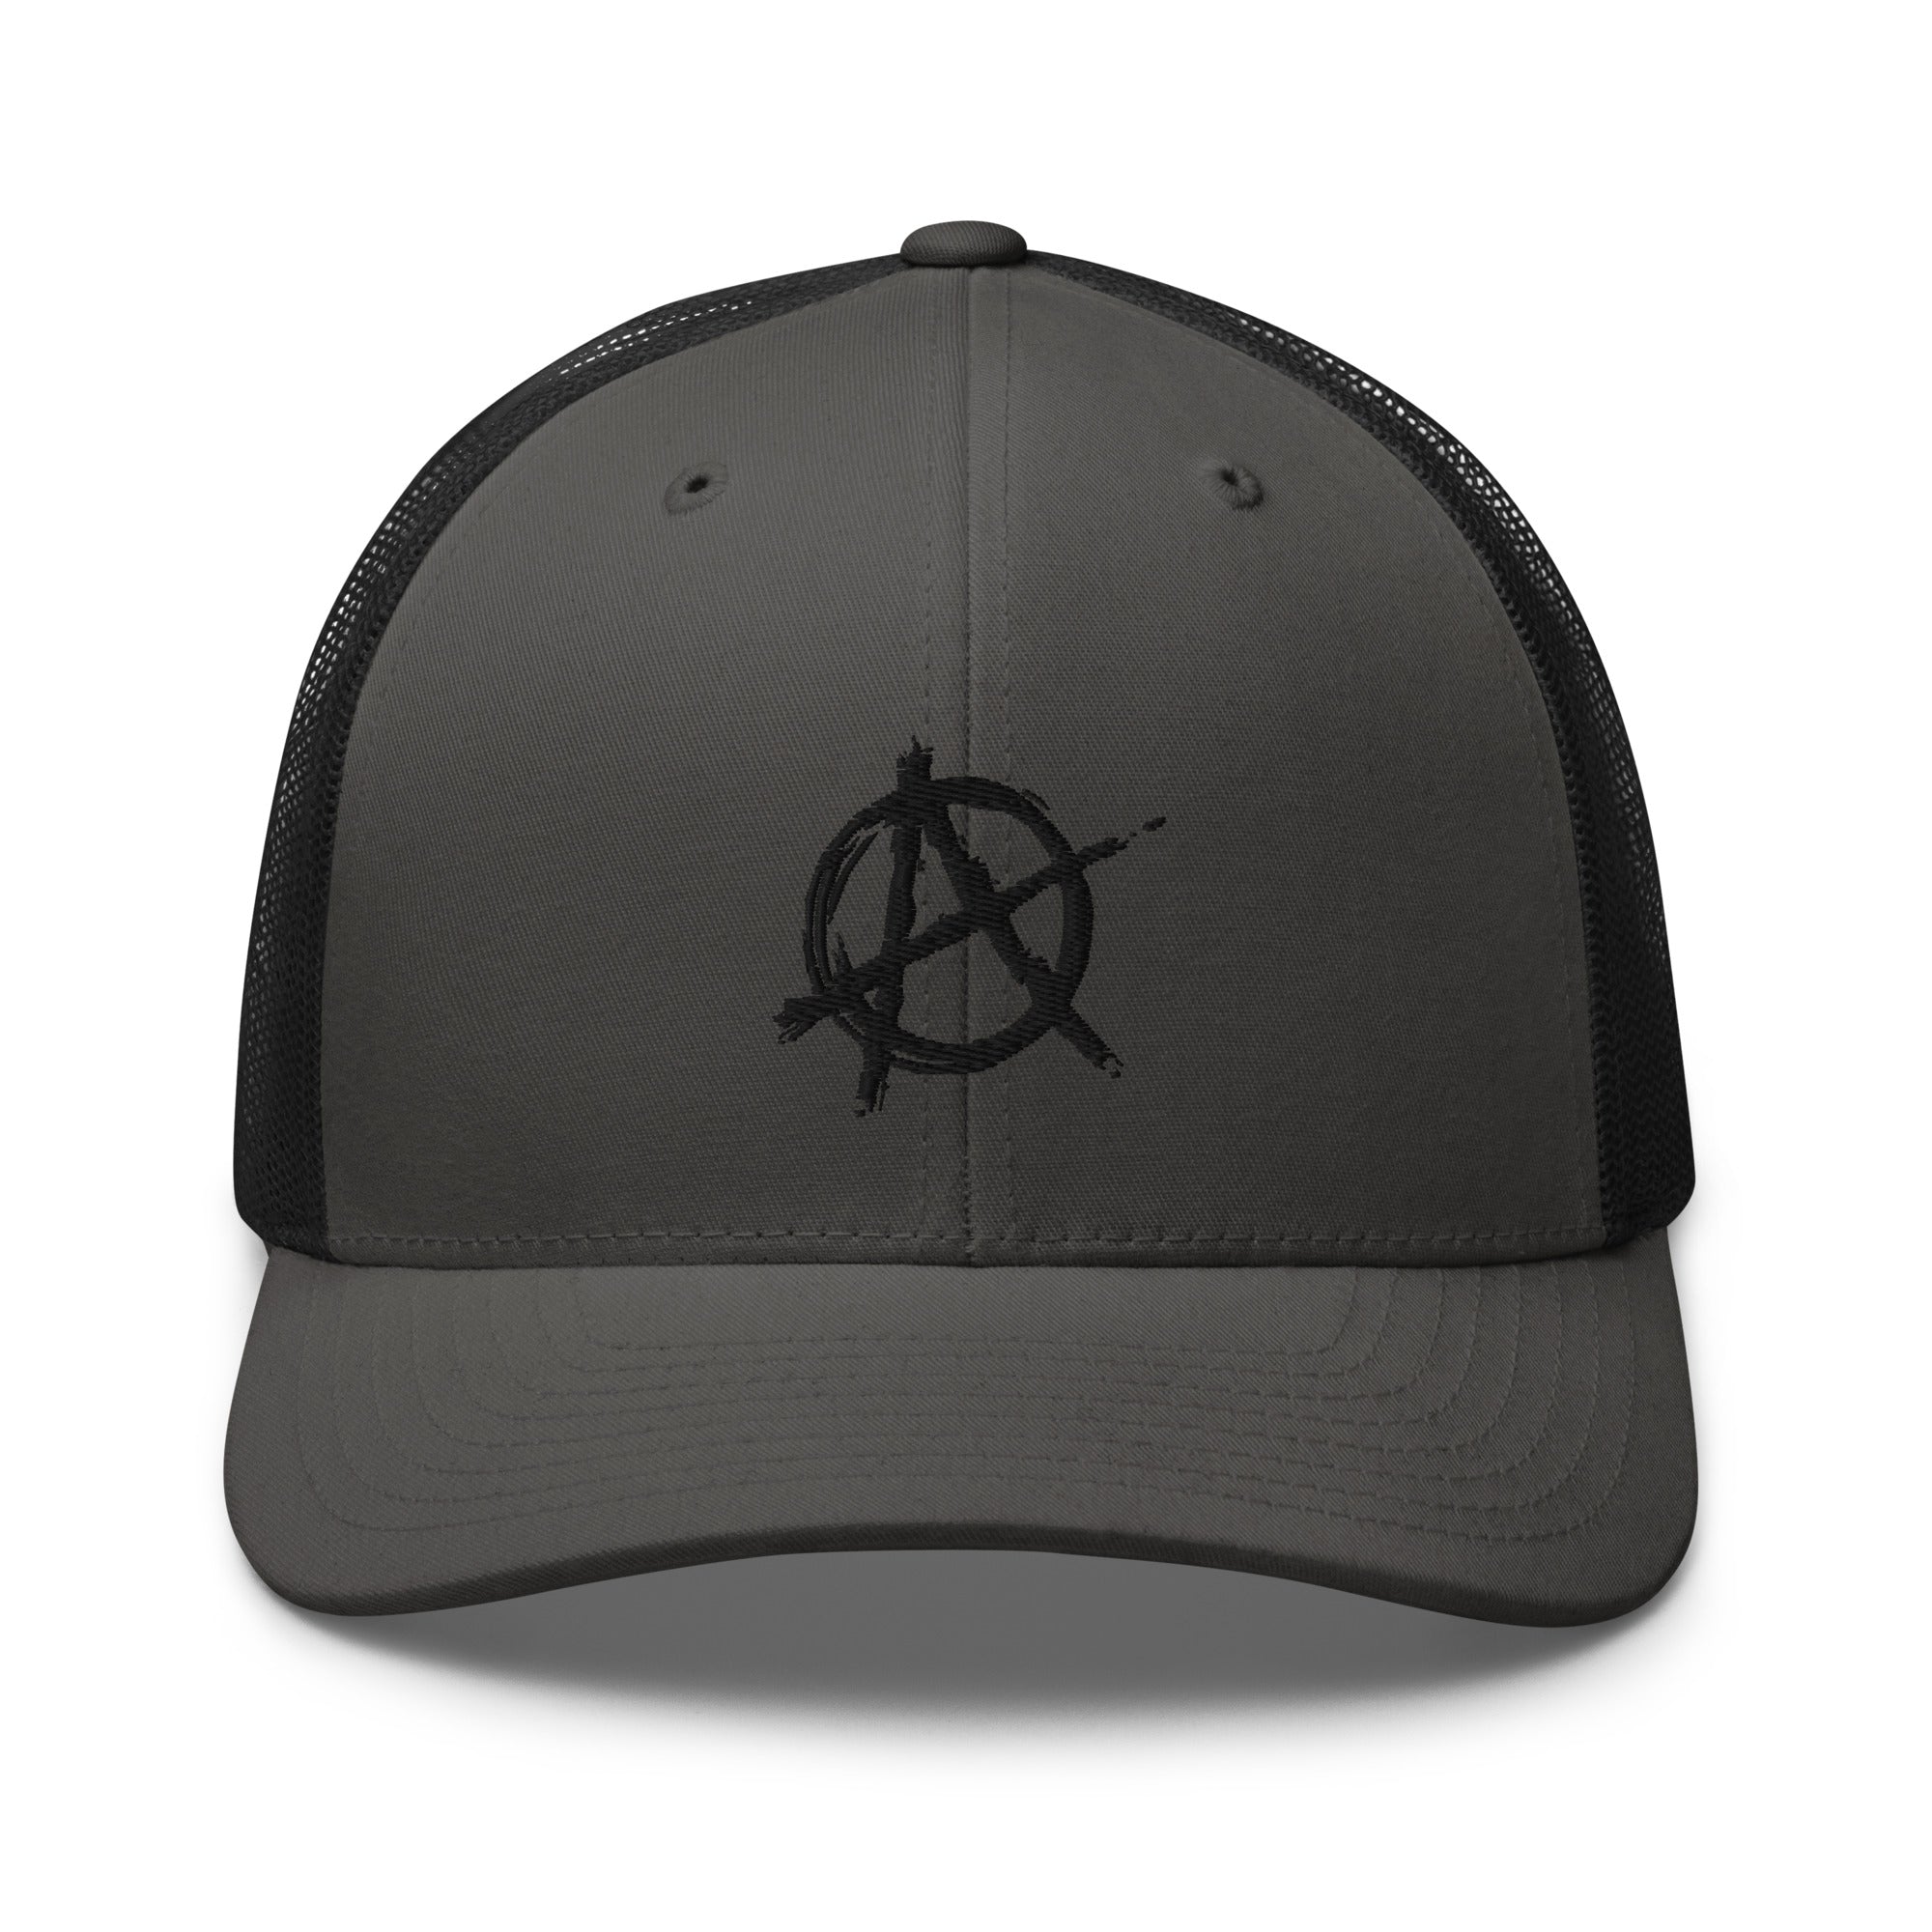 Black Anarchy Sign Punk Rock Chaos Embroidered Retro Trucker Cap Snapback Hat